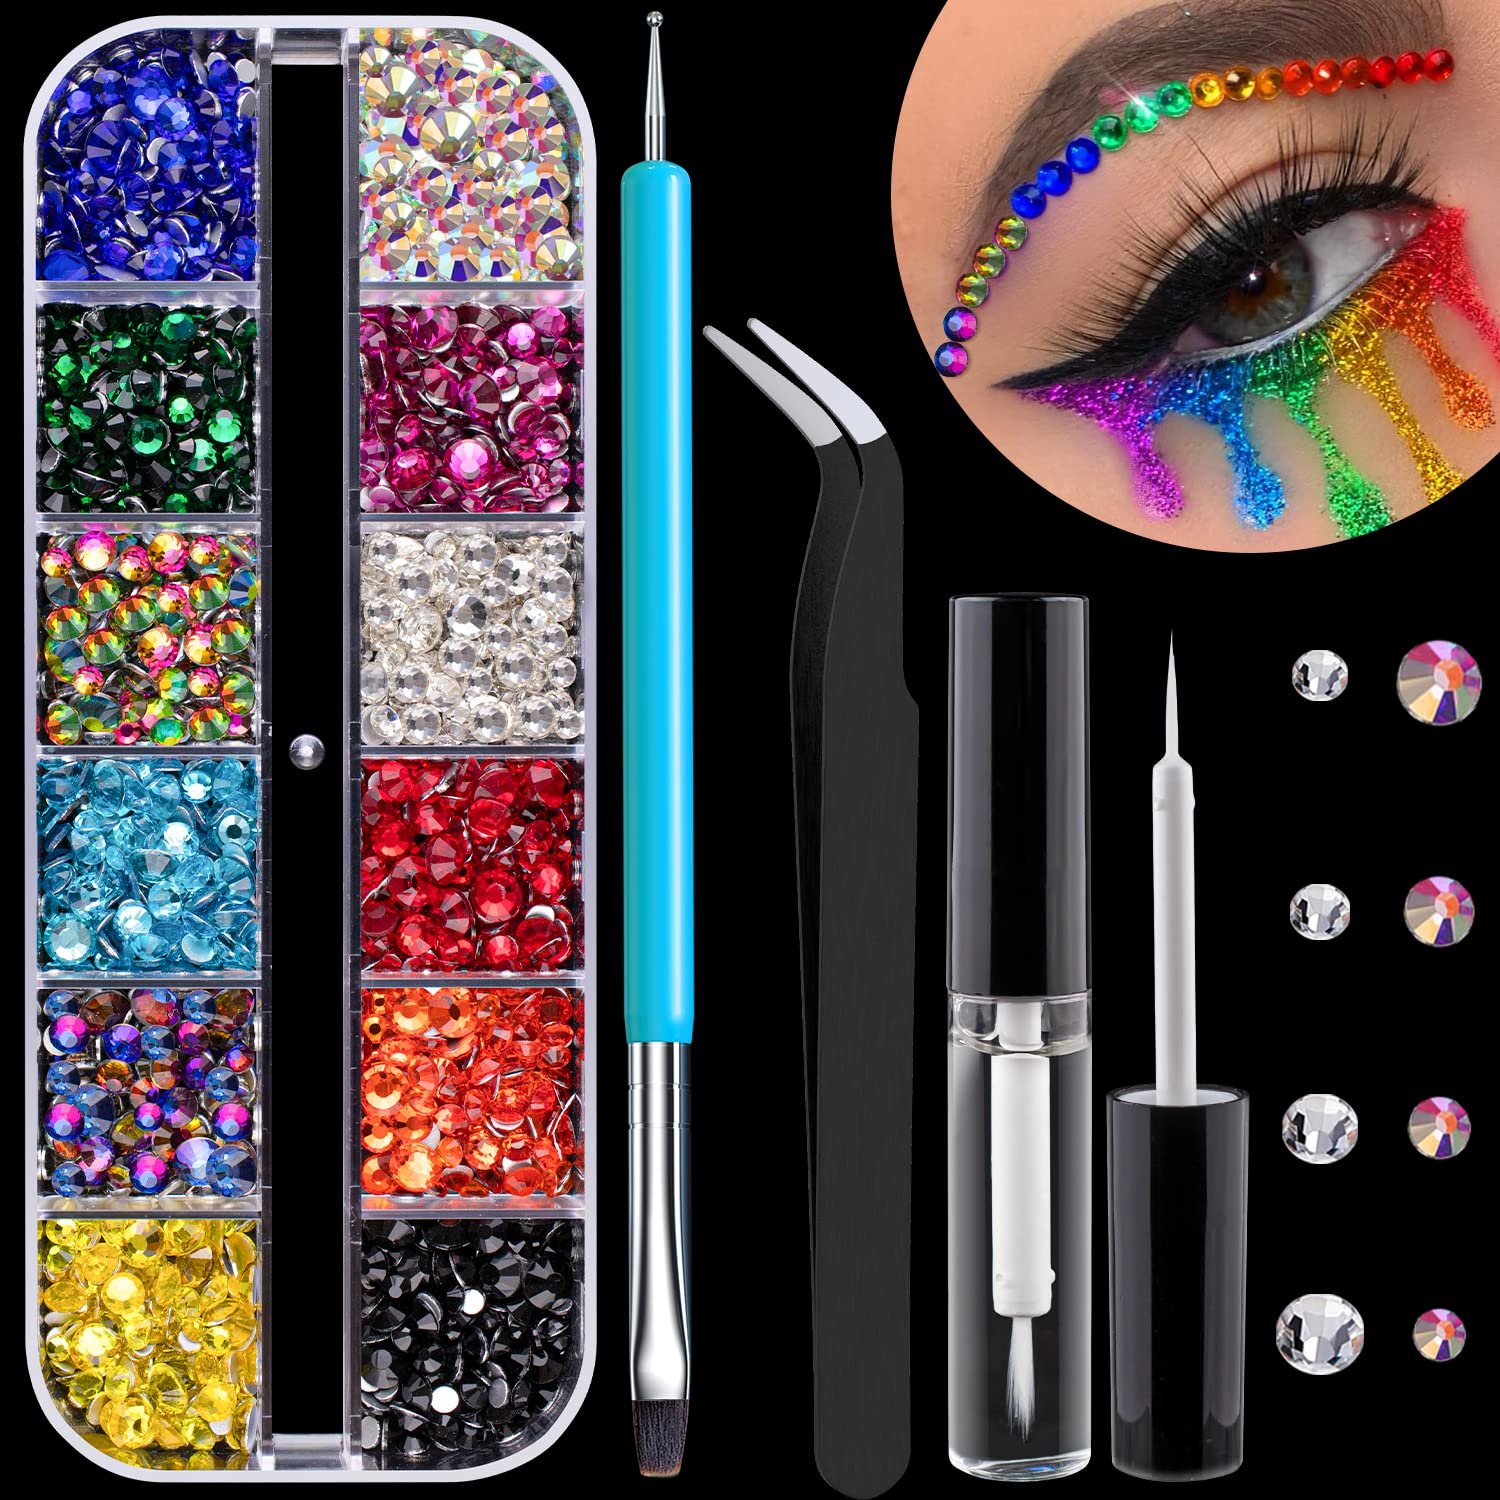 Round Flatback Face Gems Kit (Colorful) for Makeup with Quick Dry Glue + Brush + Tweezer, Nail Art Rhinestones Mixed Color Iridescent Chameleon Glass Crystal Beads for Make-up Deco .jpg